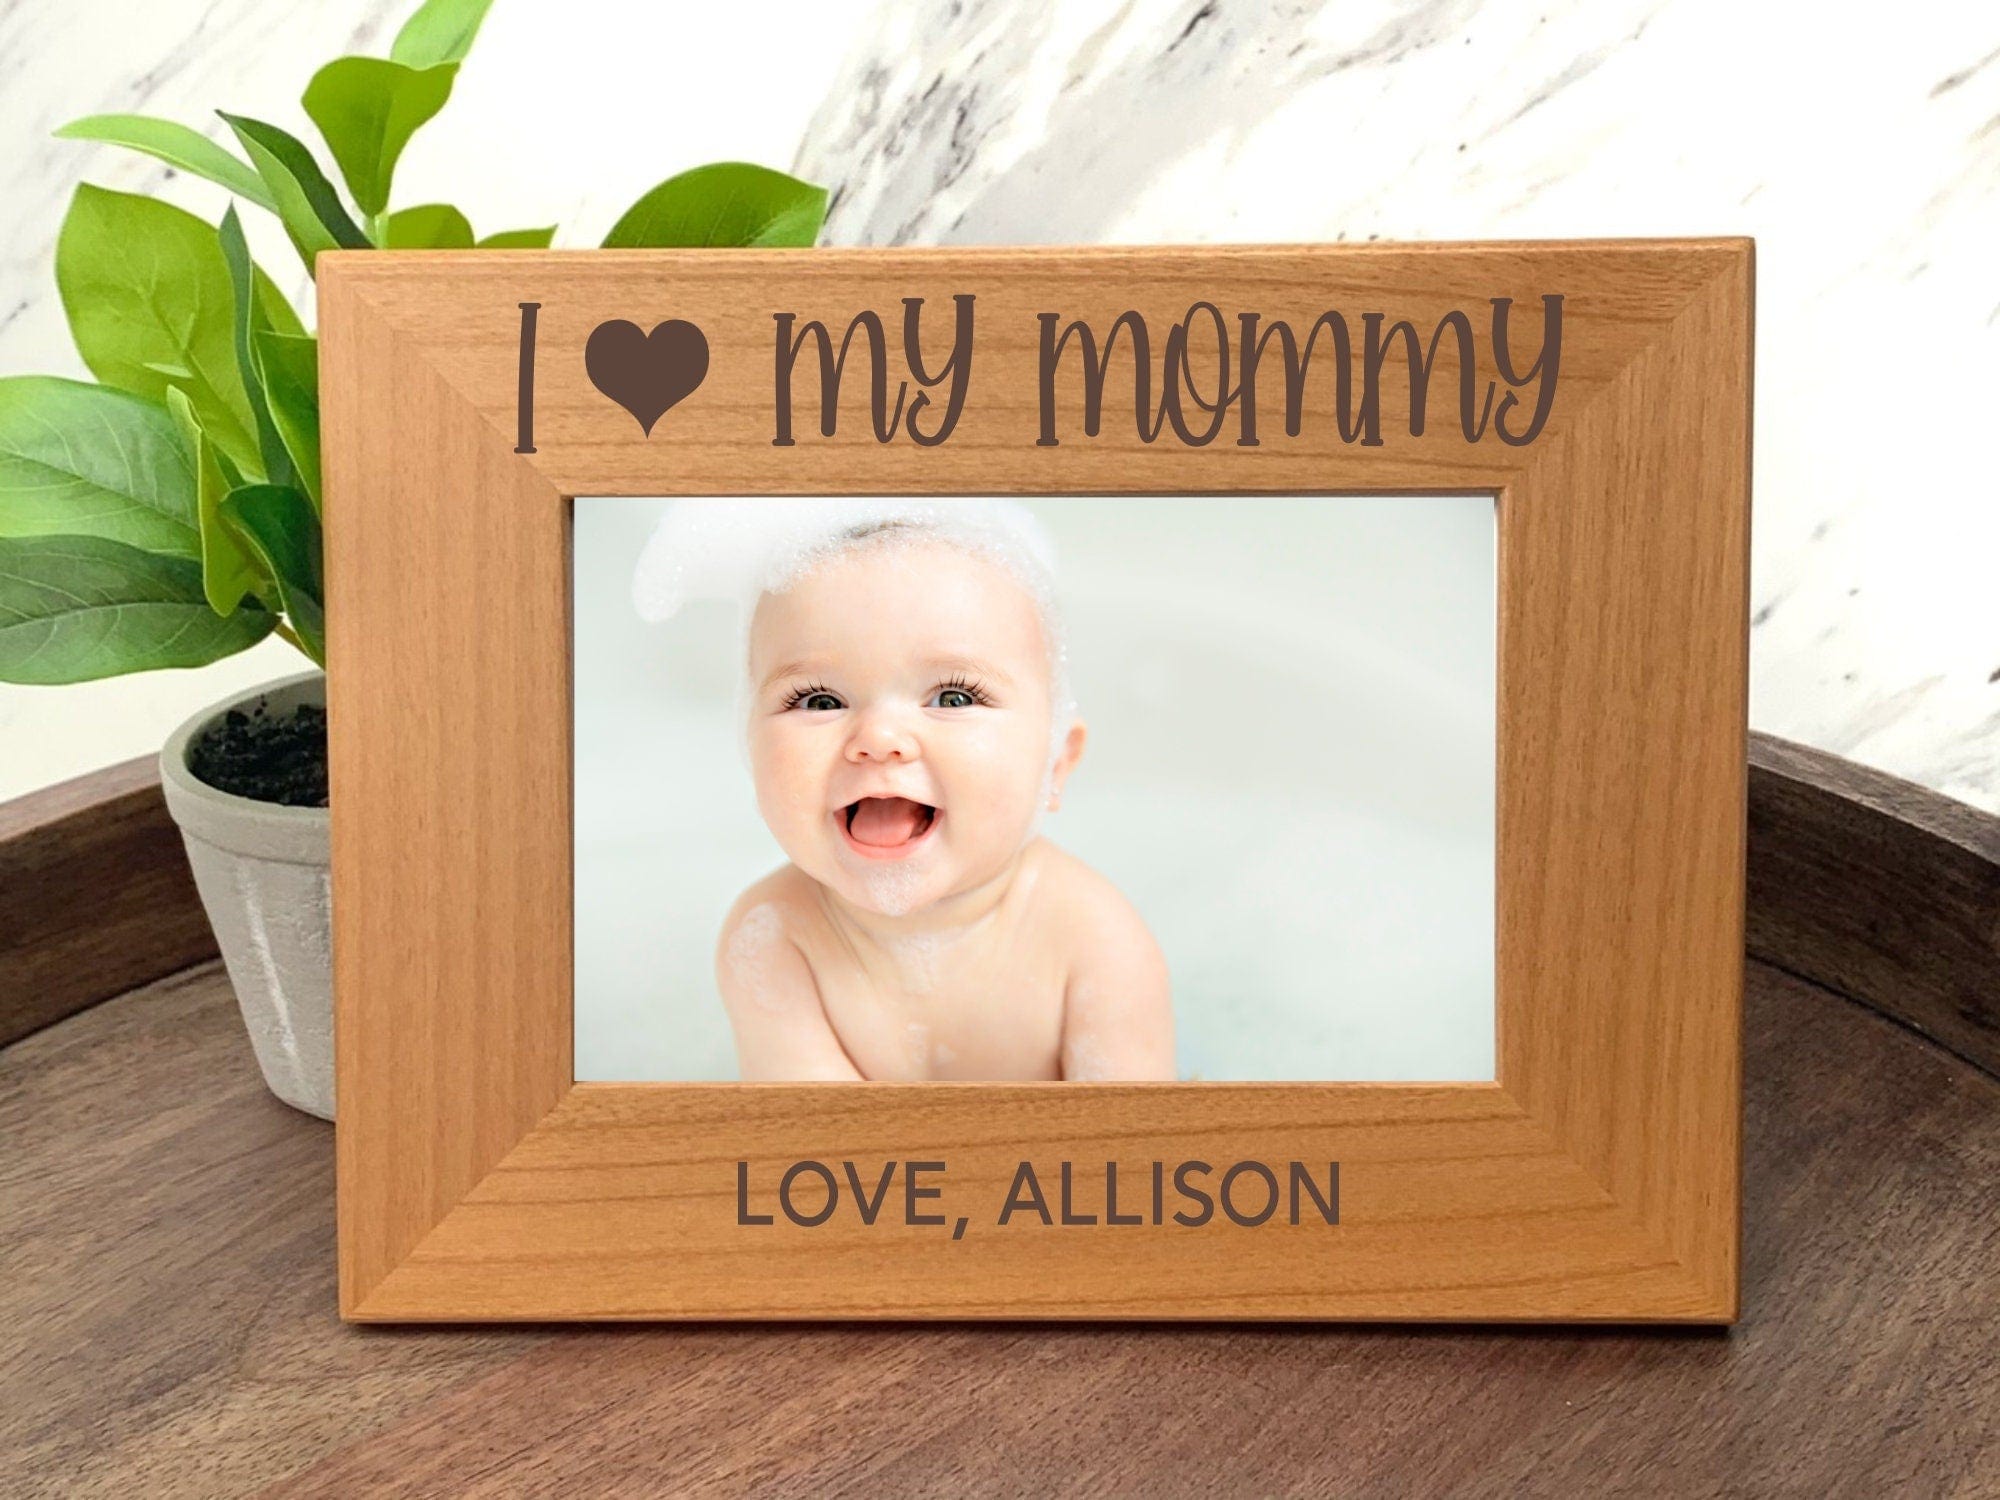 Run Wild Engraving PF 1 name Personalized I Love My Mommy Picture Frame